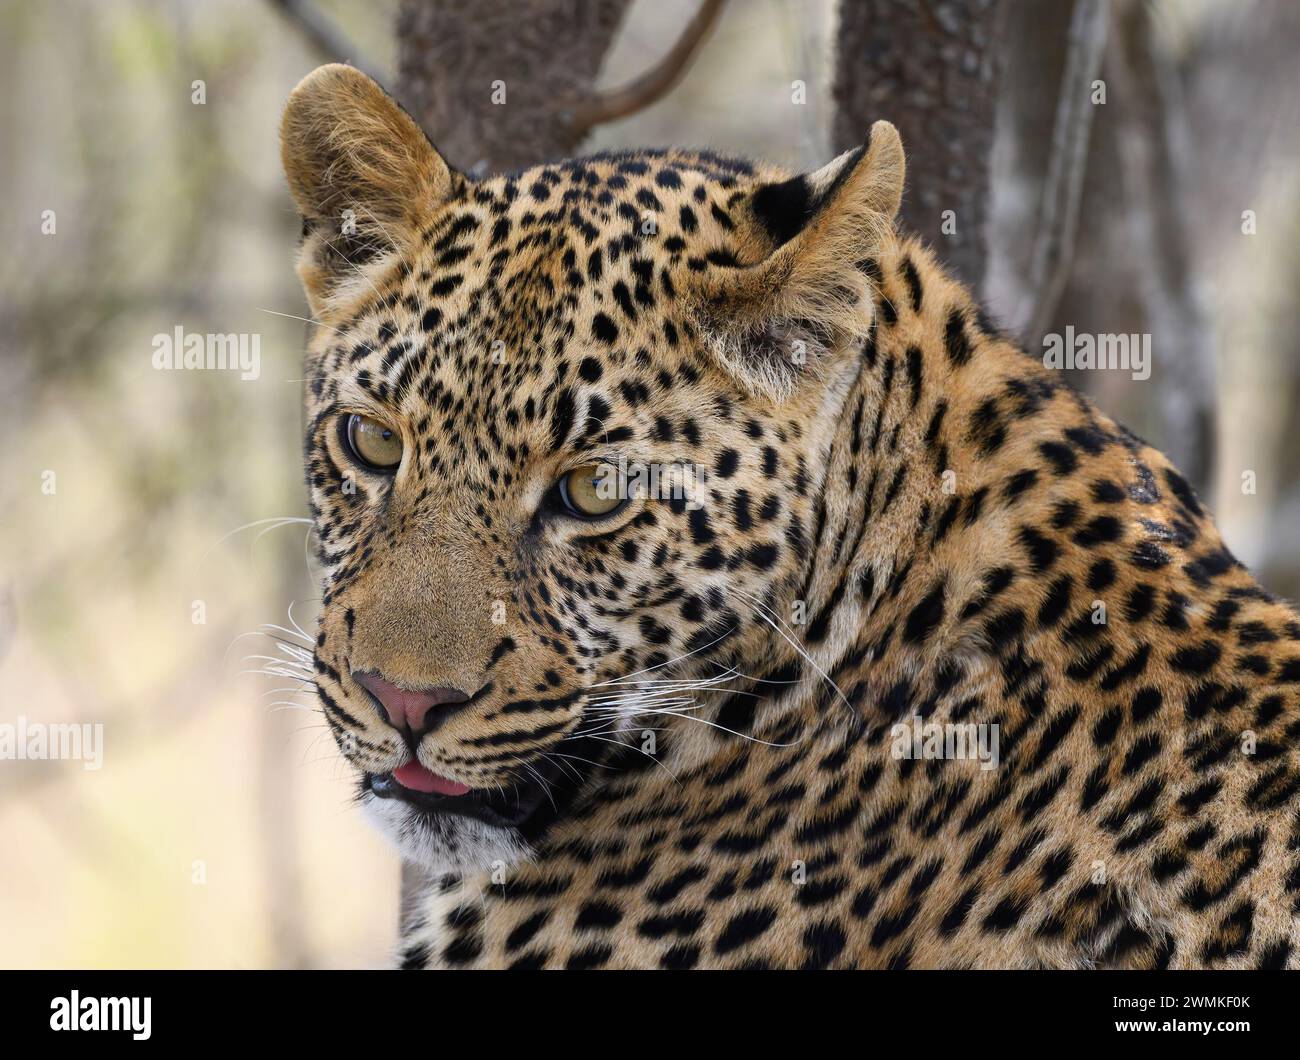 Portrait of a leopard with tongue visible Stock Photo